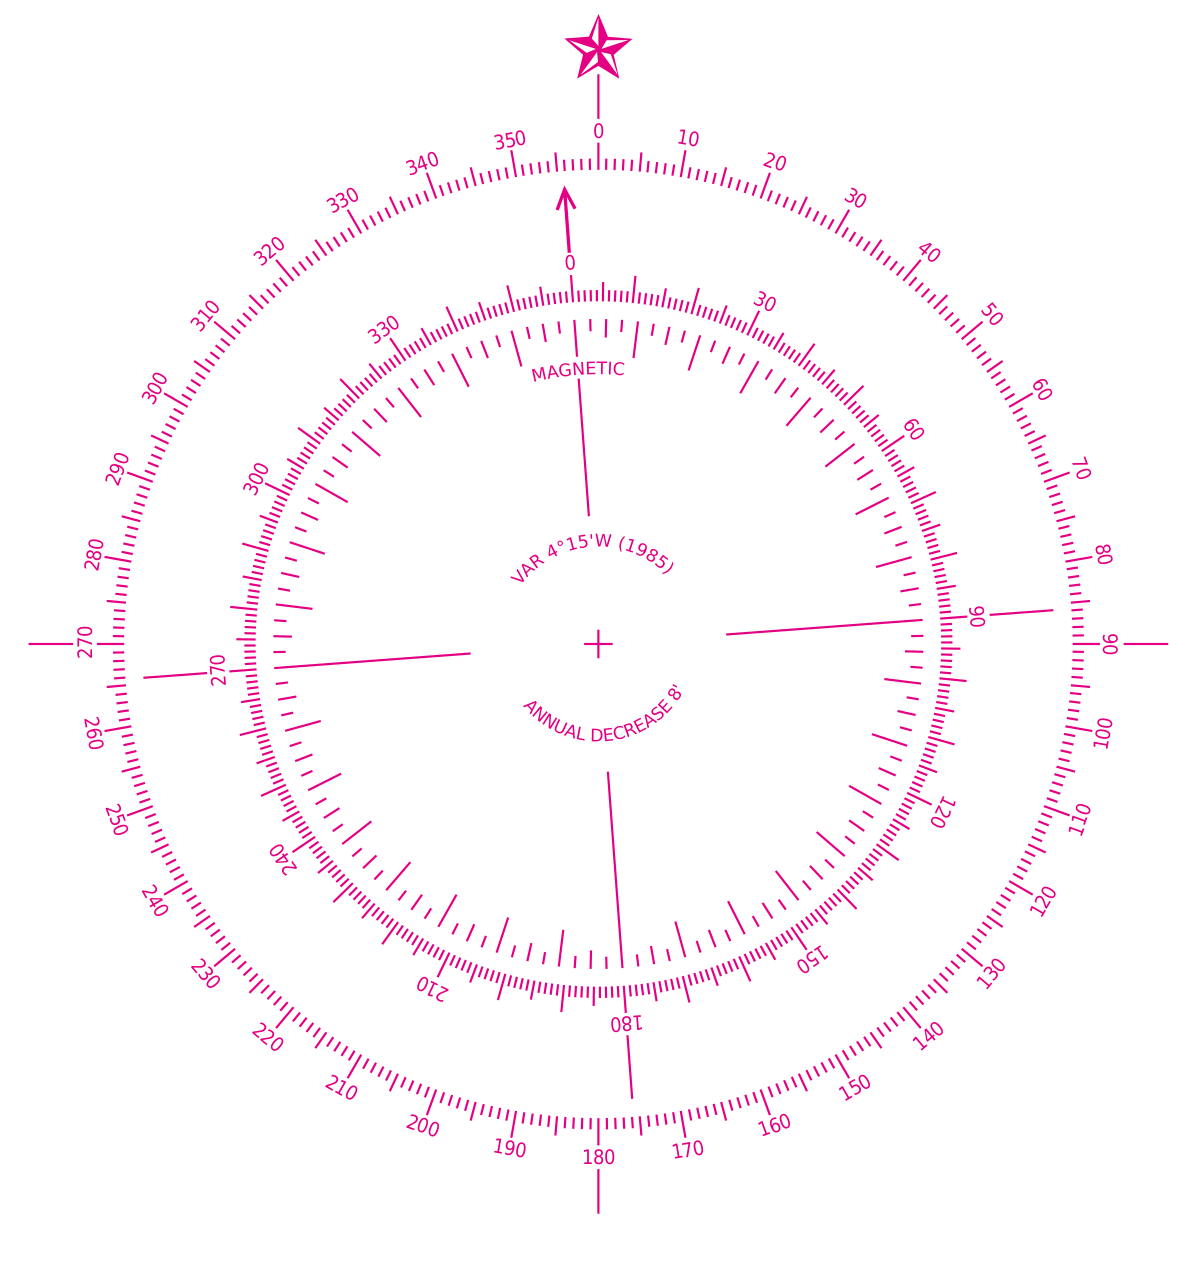 A person following a compass or wind direction